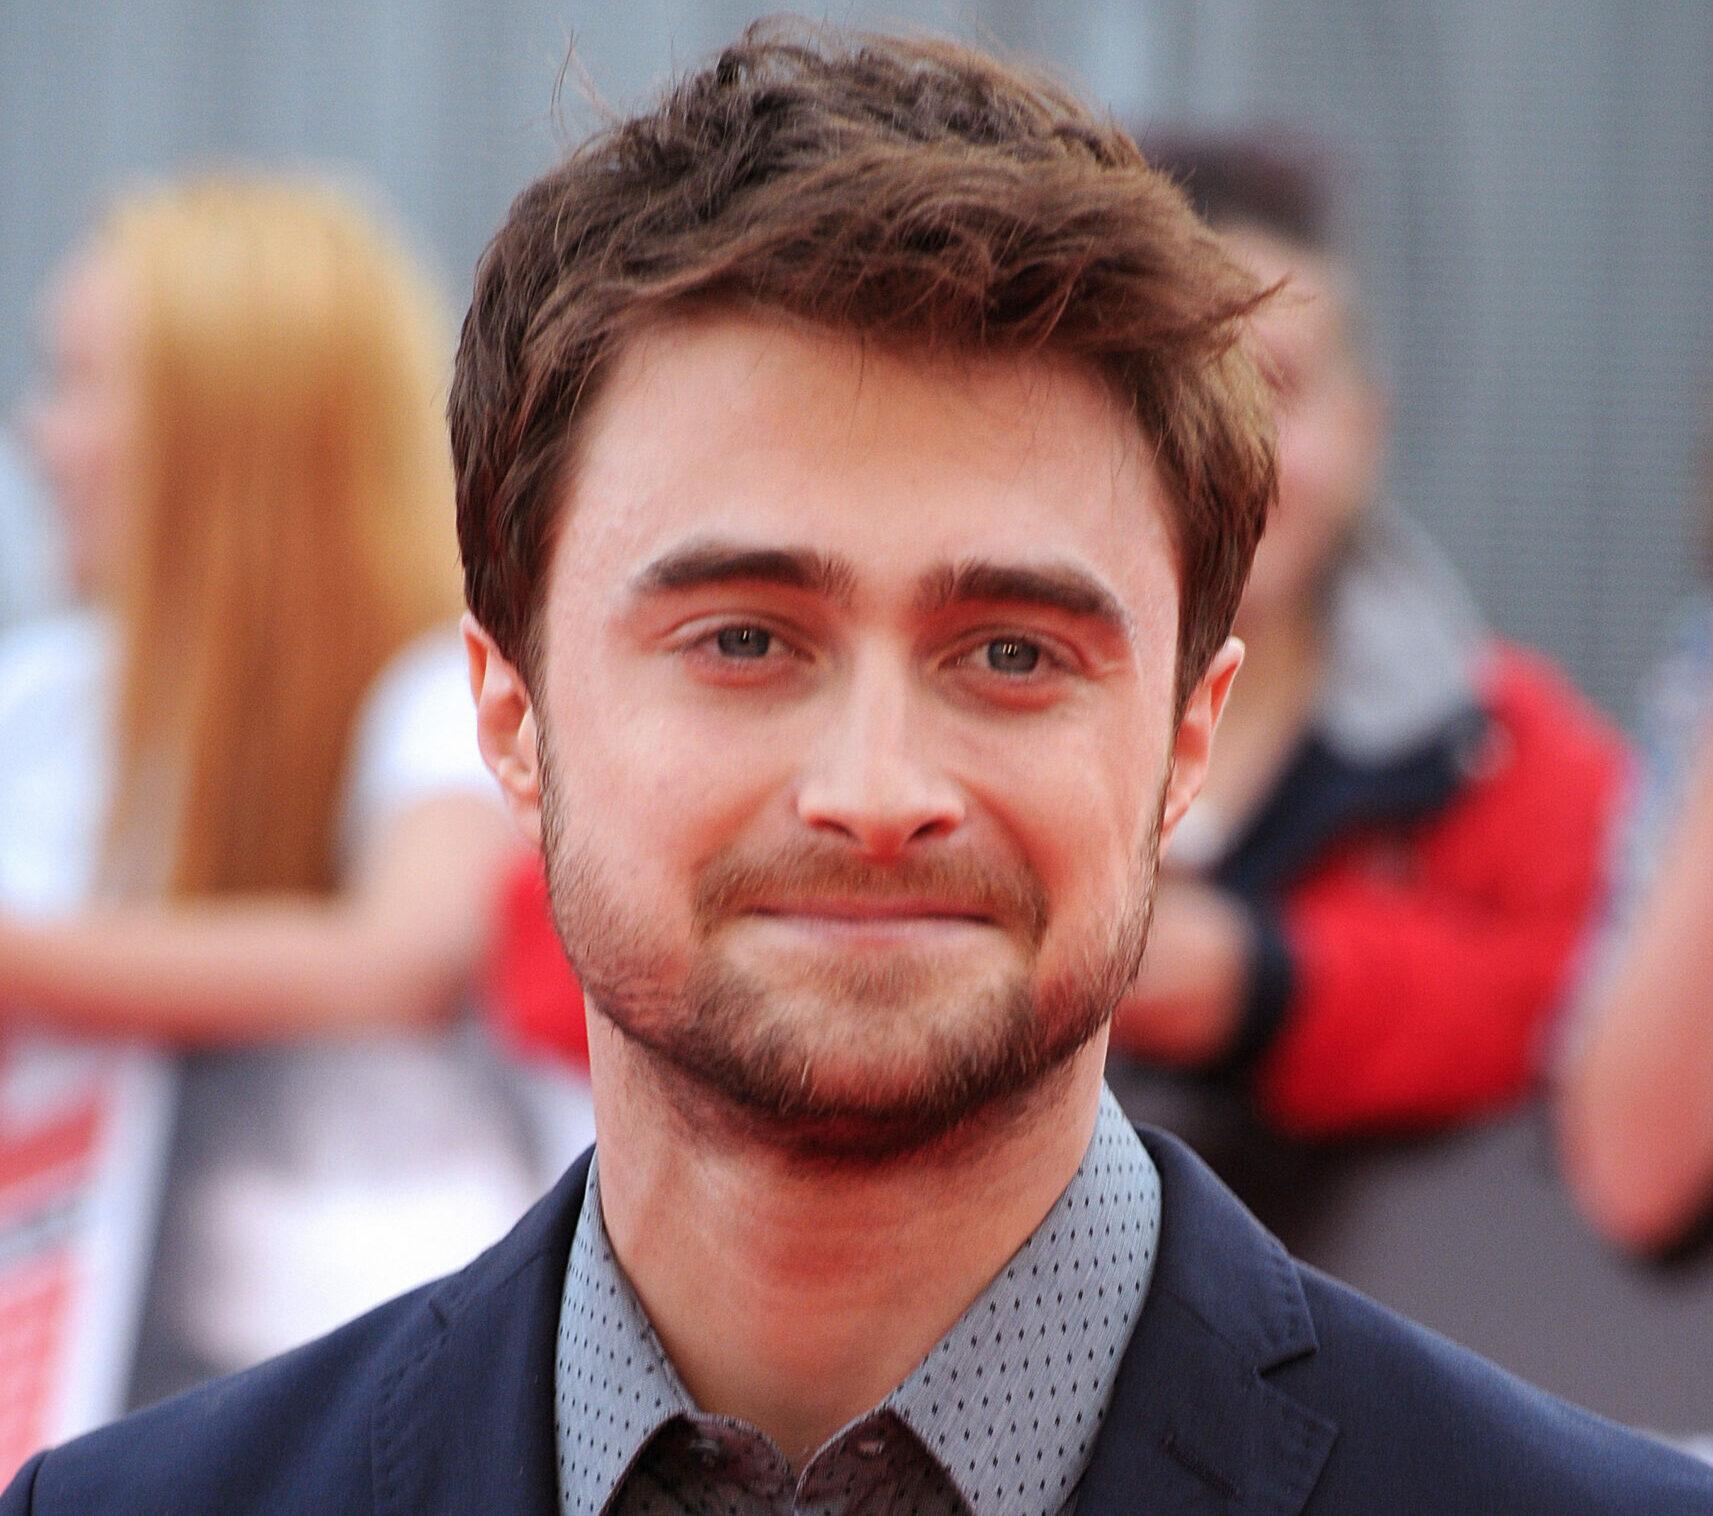 Daniel Radcliffe attends the premieres of Swiss Army Man and Imperium at the O2 Arena